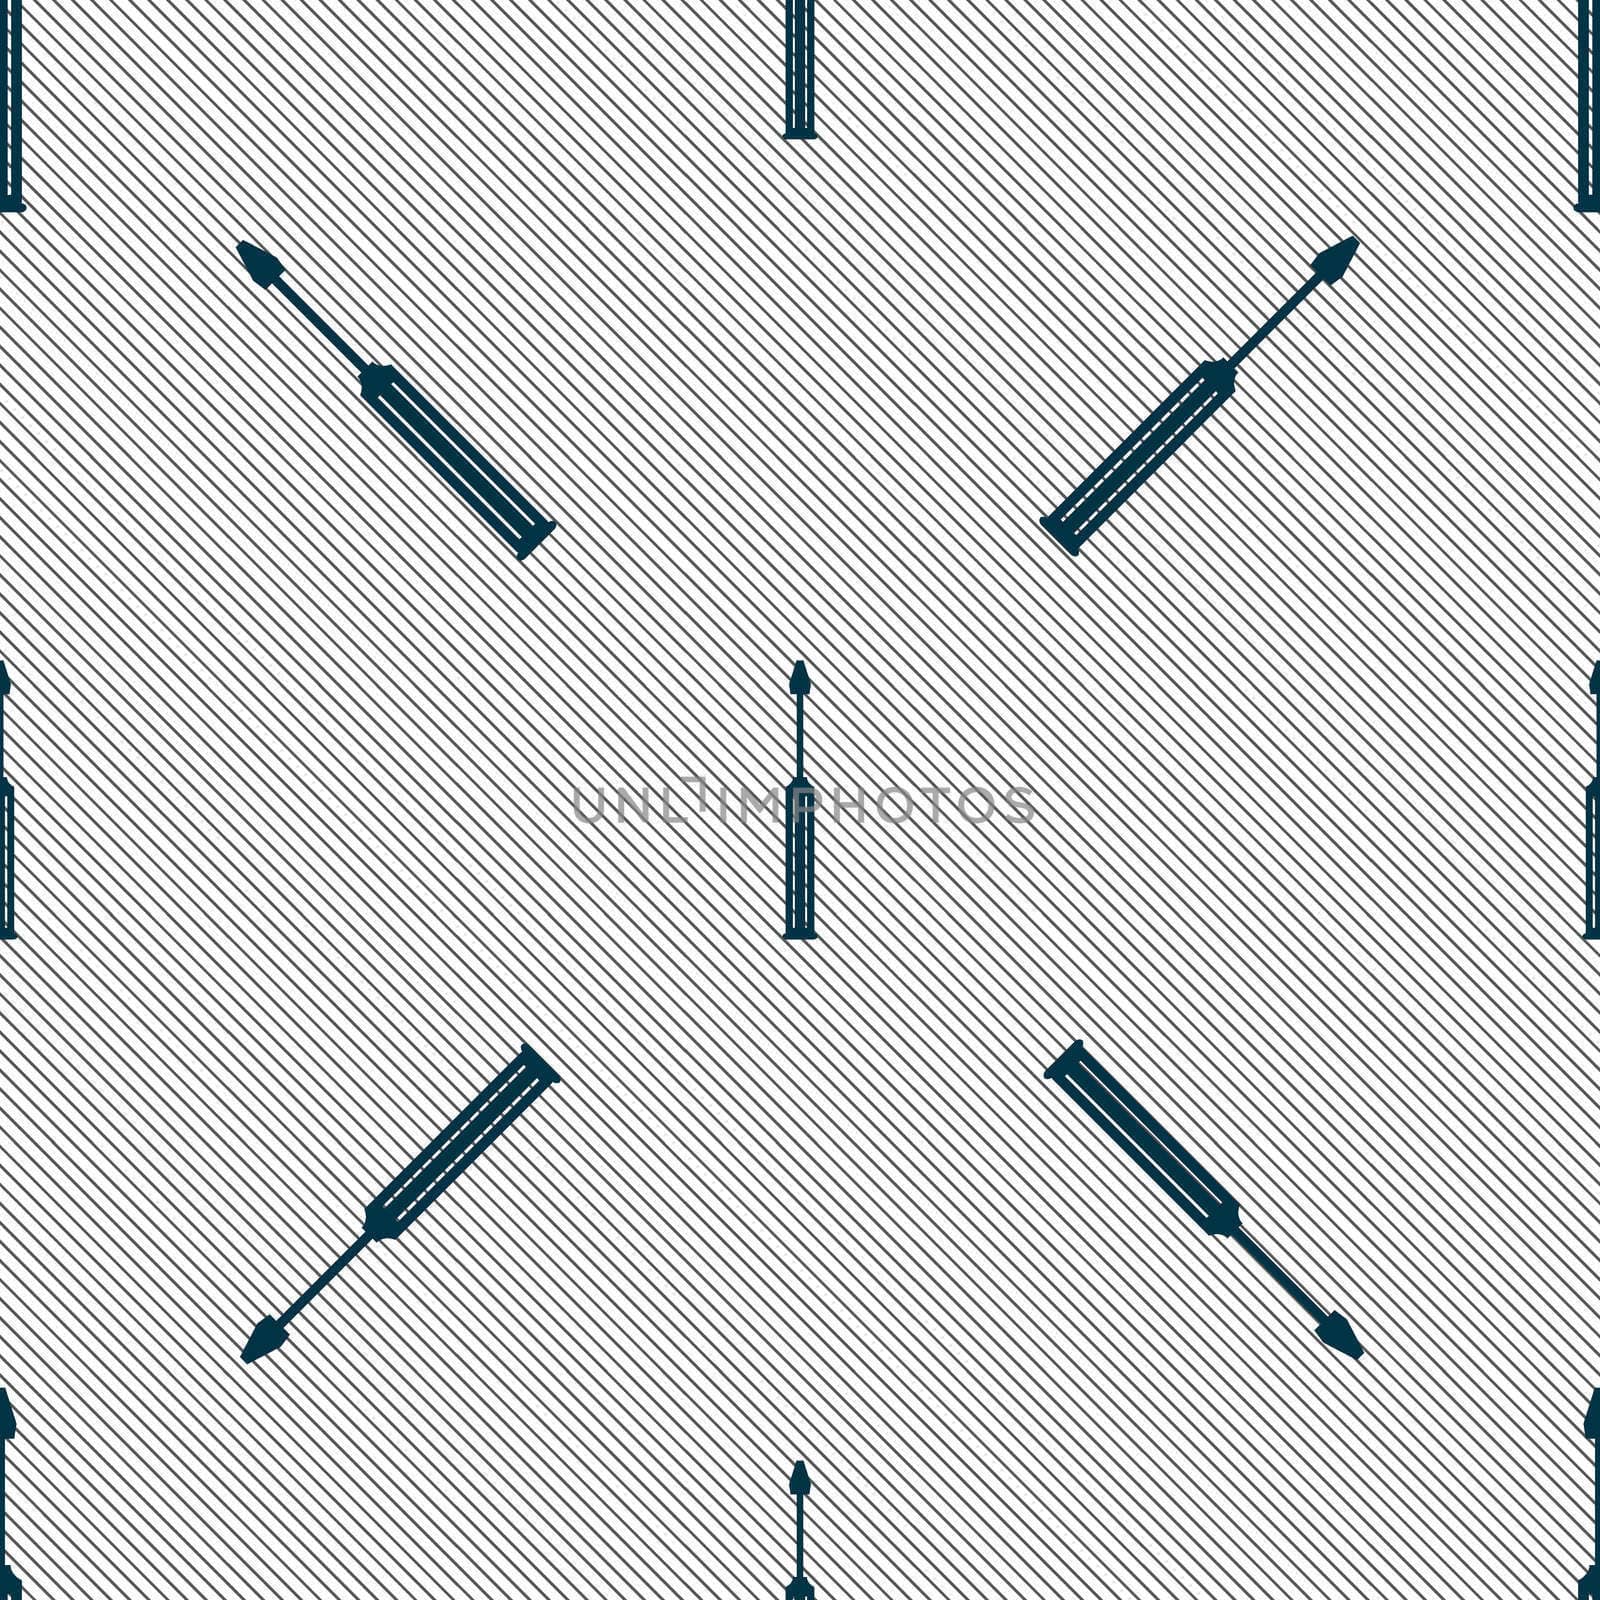 Screwdriver tool sign icon. Fix it symbol. Repair sig. Seamless pattern with geometric texture. illustration